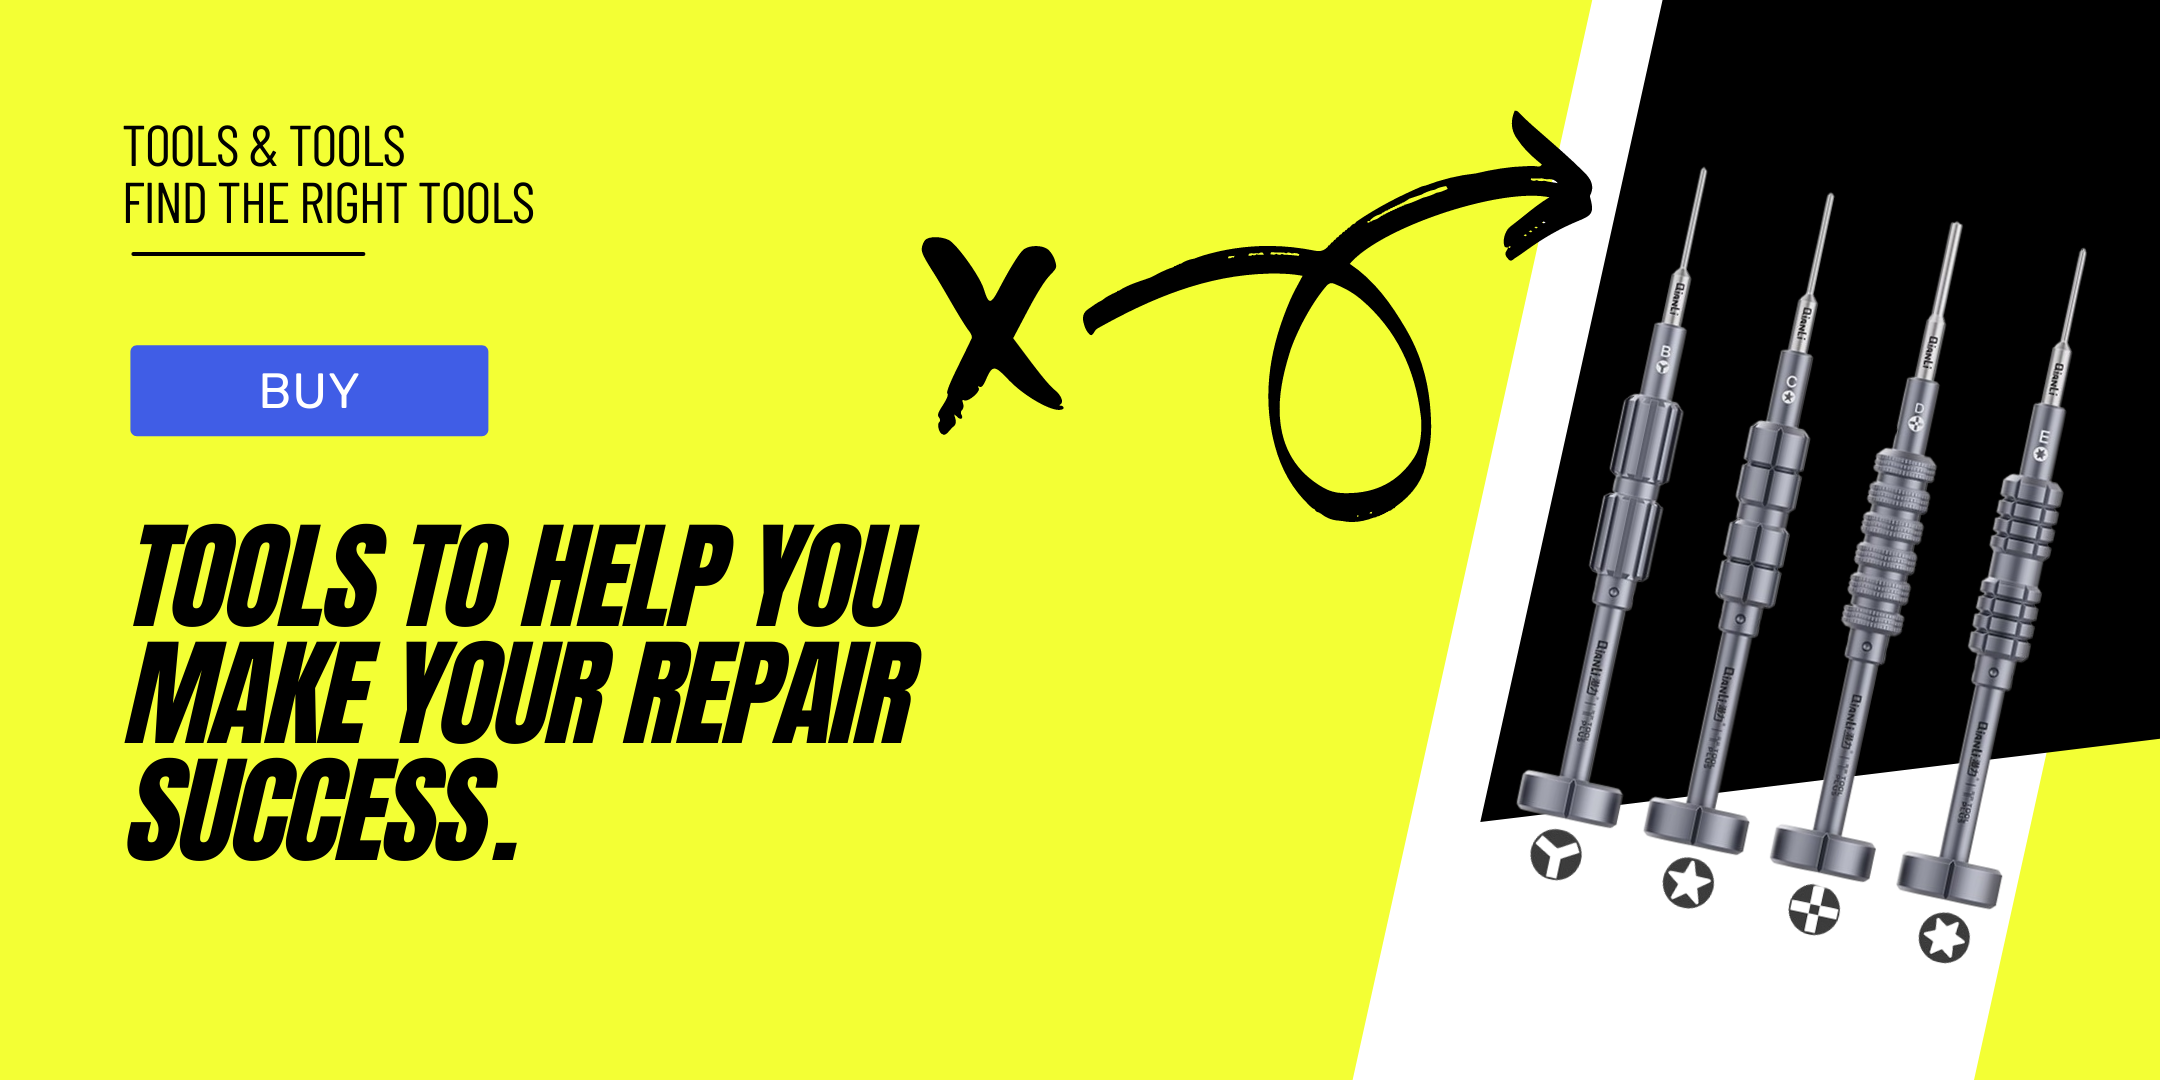 Tools to help you make your repair success